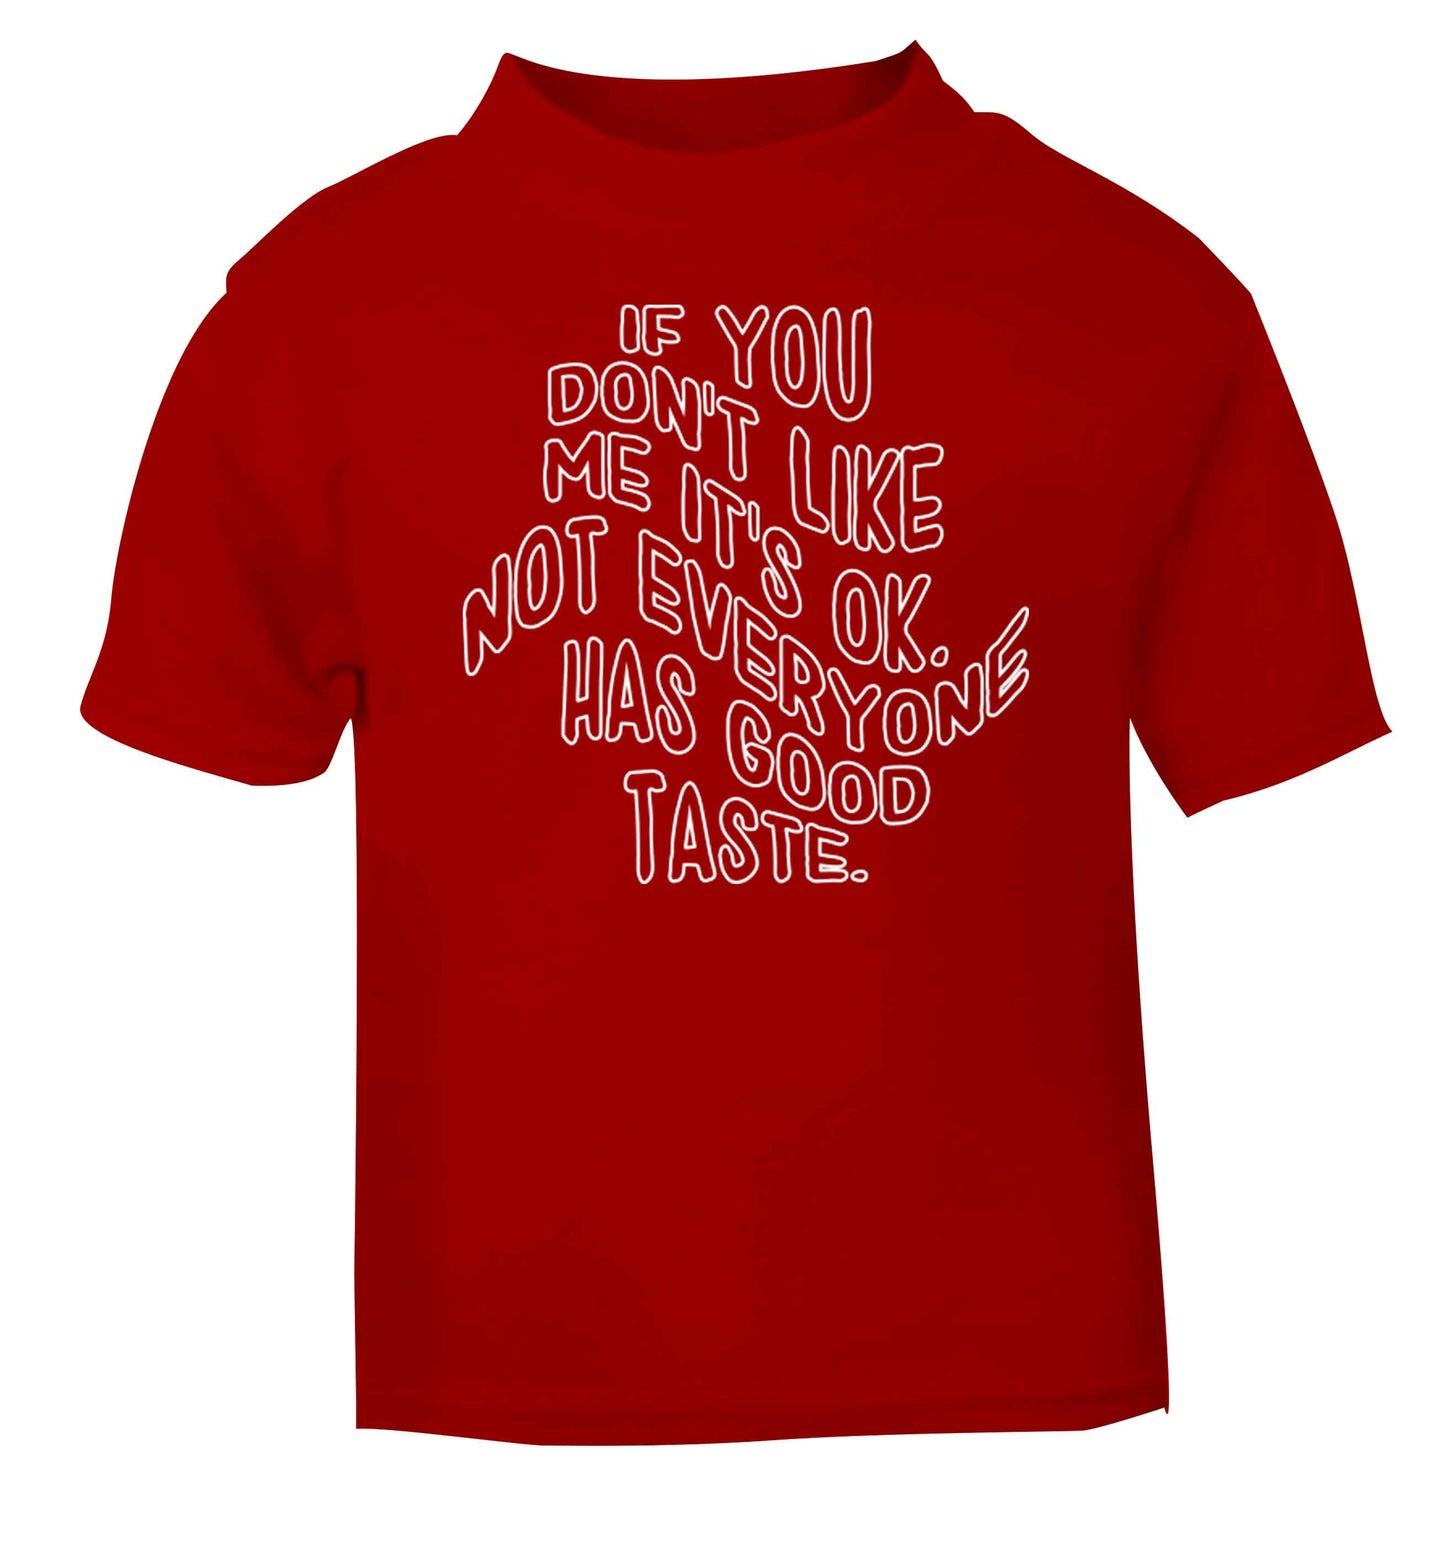 If you don't like me it's ok not everyone has good taste red baby toddler Tshirt 2 Years